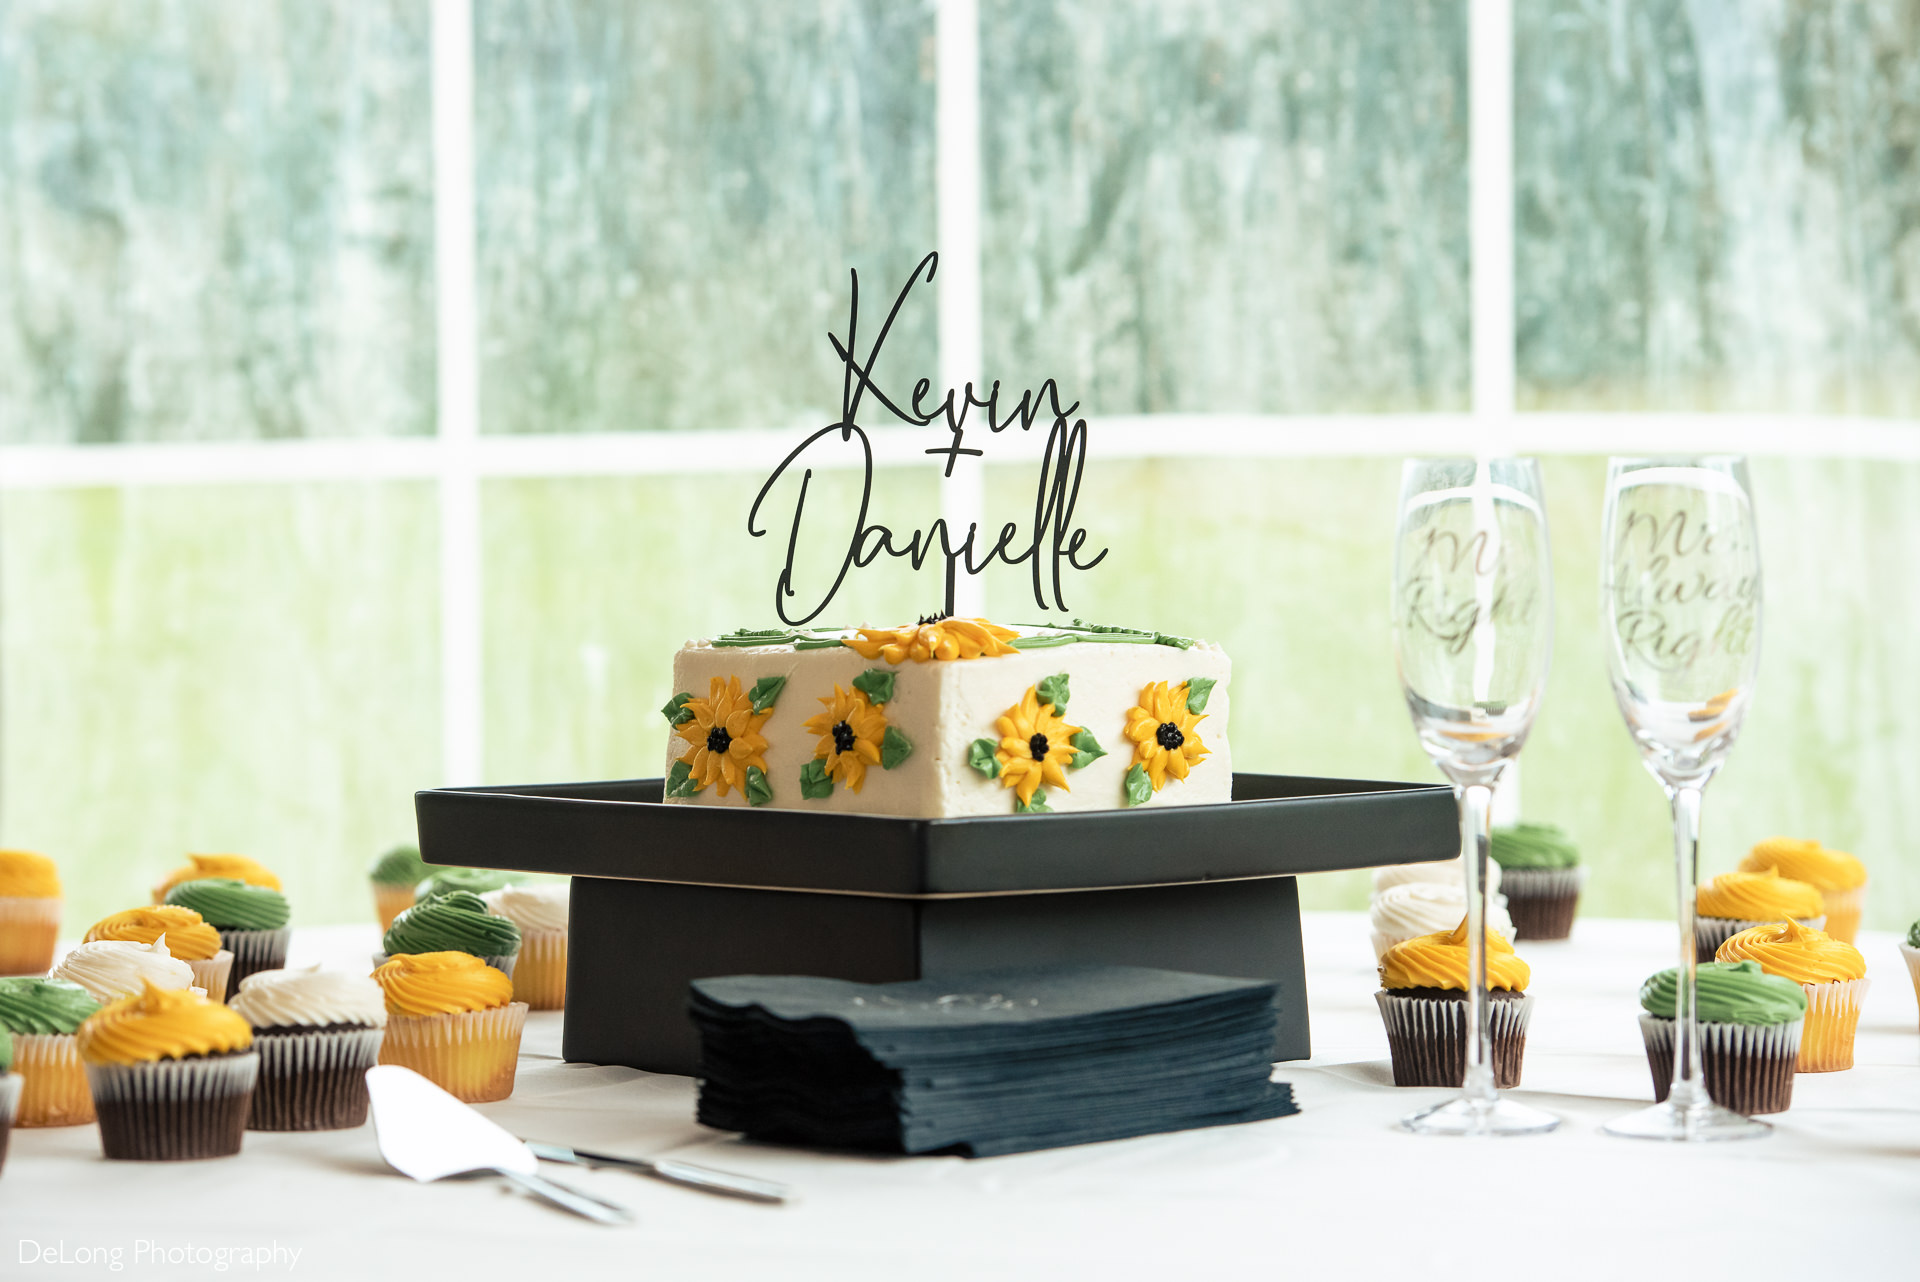 Green and Yellow sunflower wedding cake and cupcakes at the Island House in Charleston, SC by Charlotte Wedding Photographers DeLong Photography